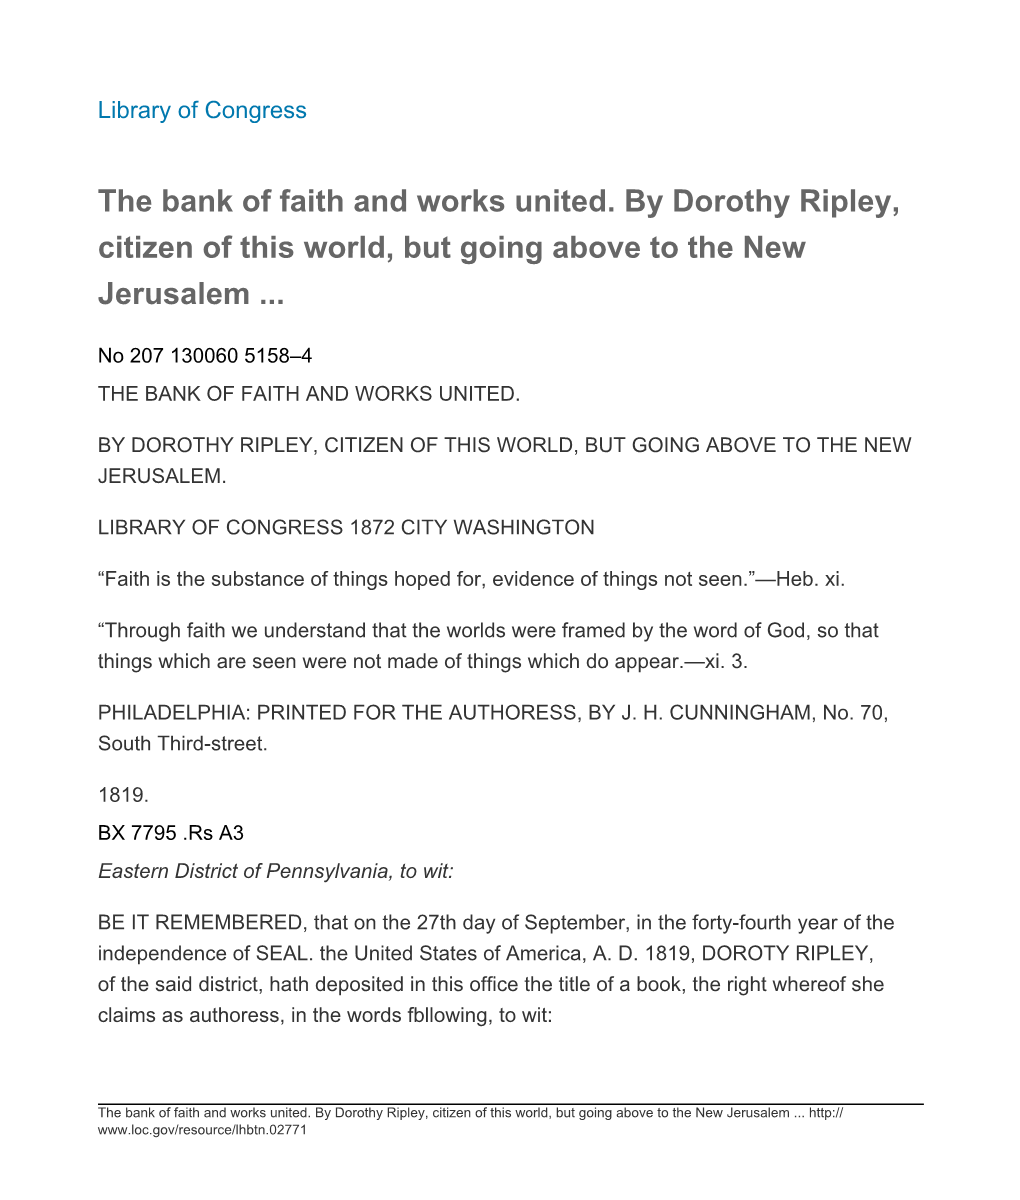 The Bank of Faith and Works United. by Dorothy Ripley, Citizen of This World, but Going Above to the New Jerusalem